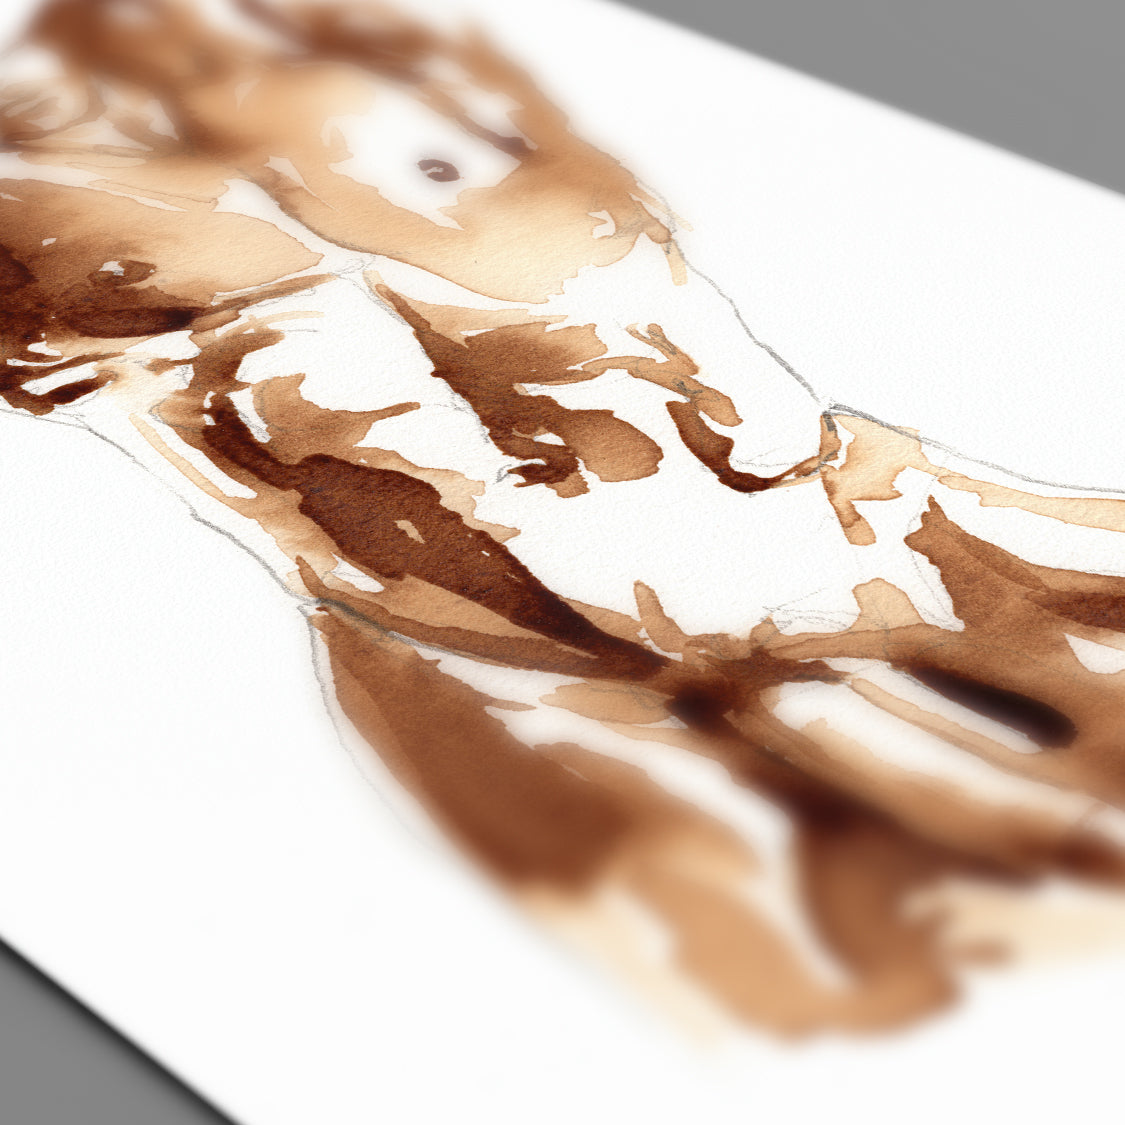 Lost in the Movement - Made with Coffee - Art Print by Brenden Sanborn